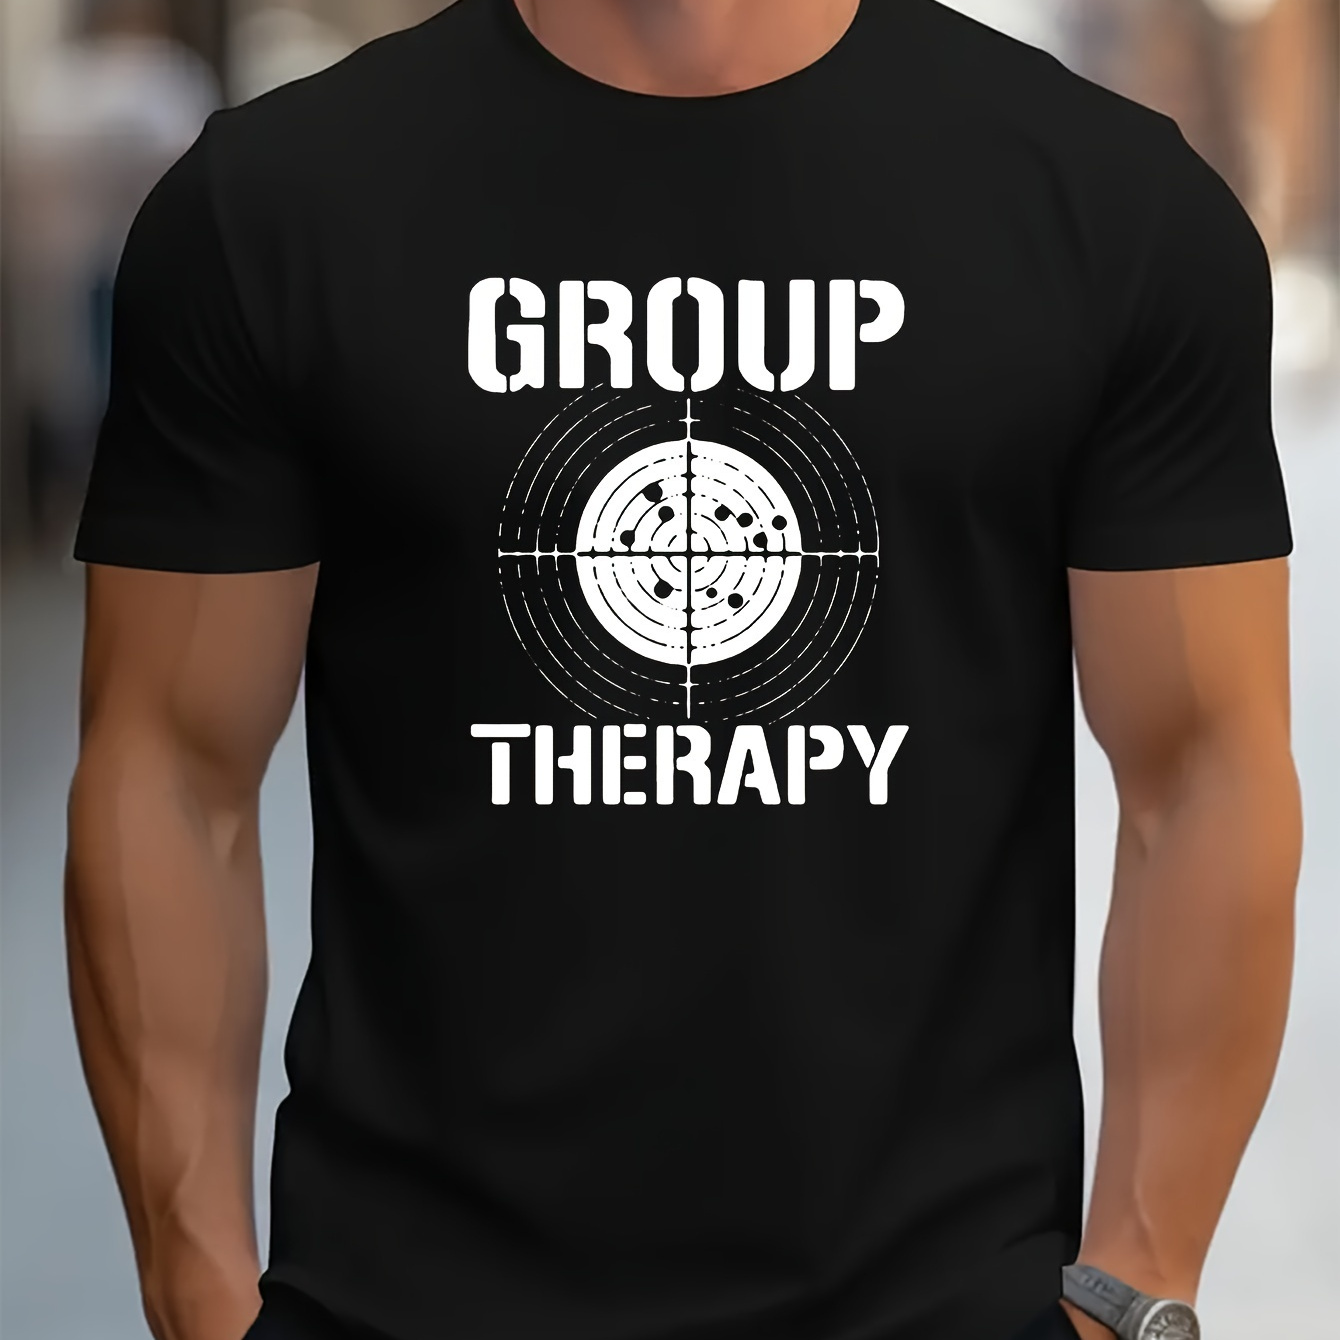 

Group Therapy Print Men's Short Sleeve T-shirts, Comfy Casual Elastic Crew Neck Tops For Men's Outdoor Activities